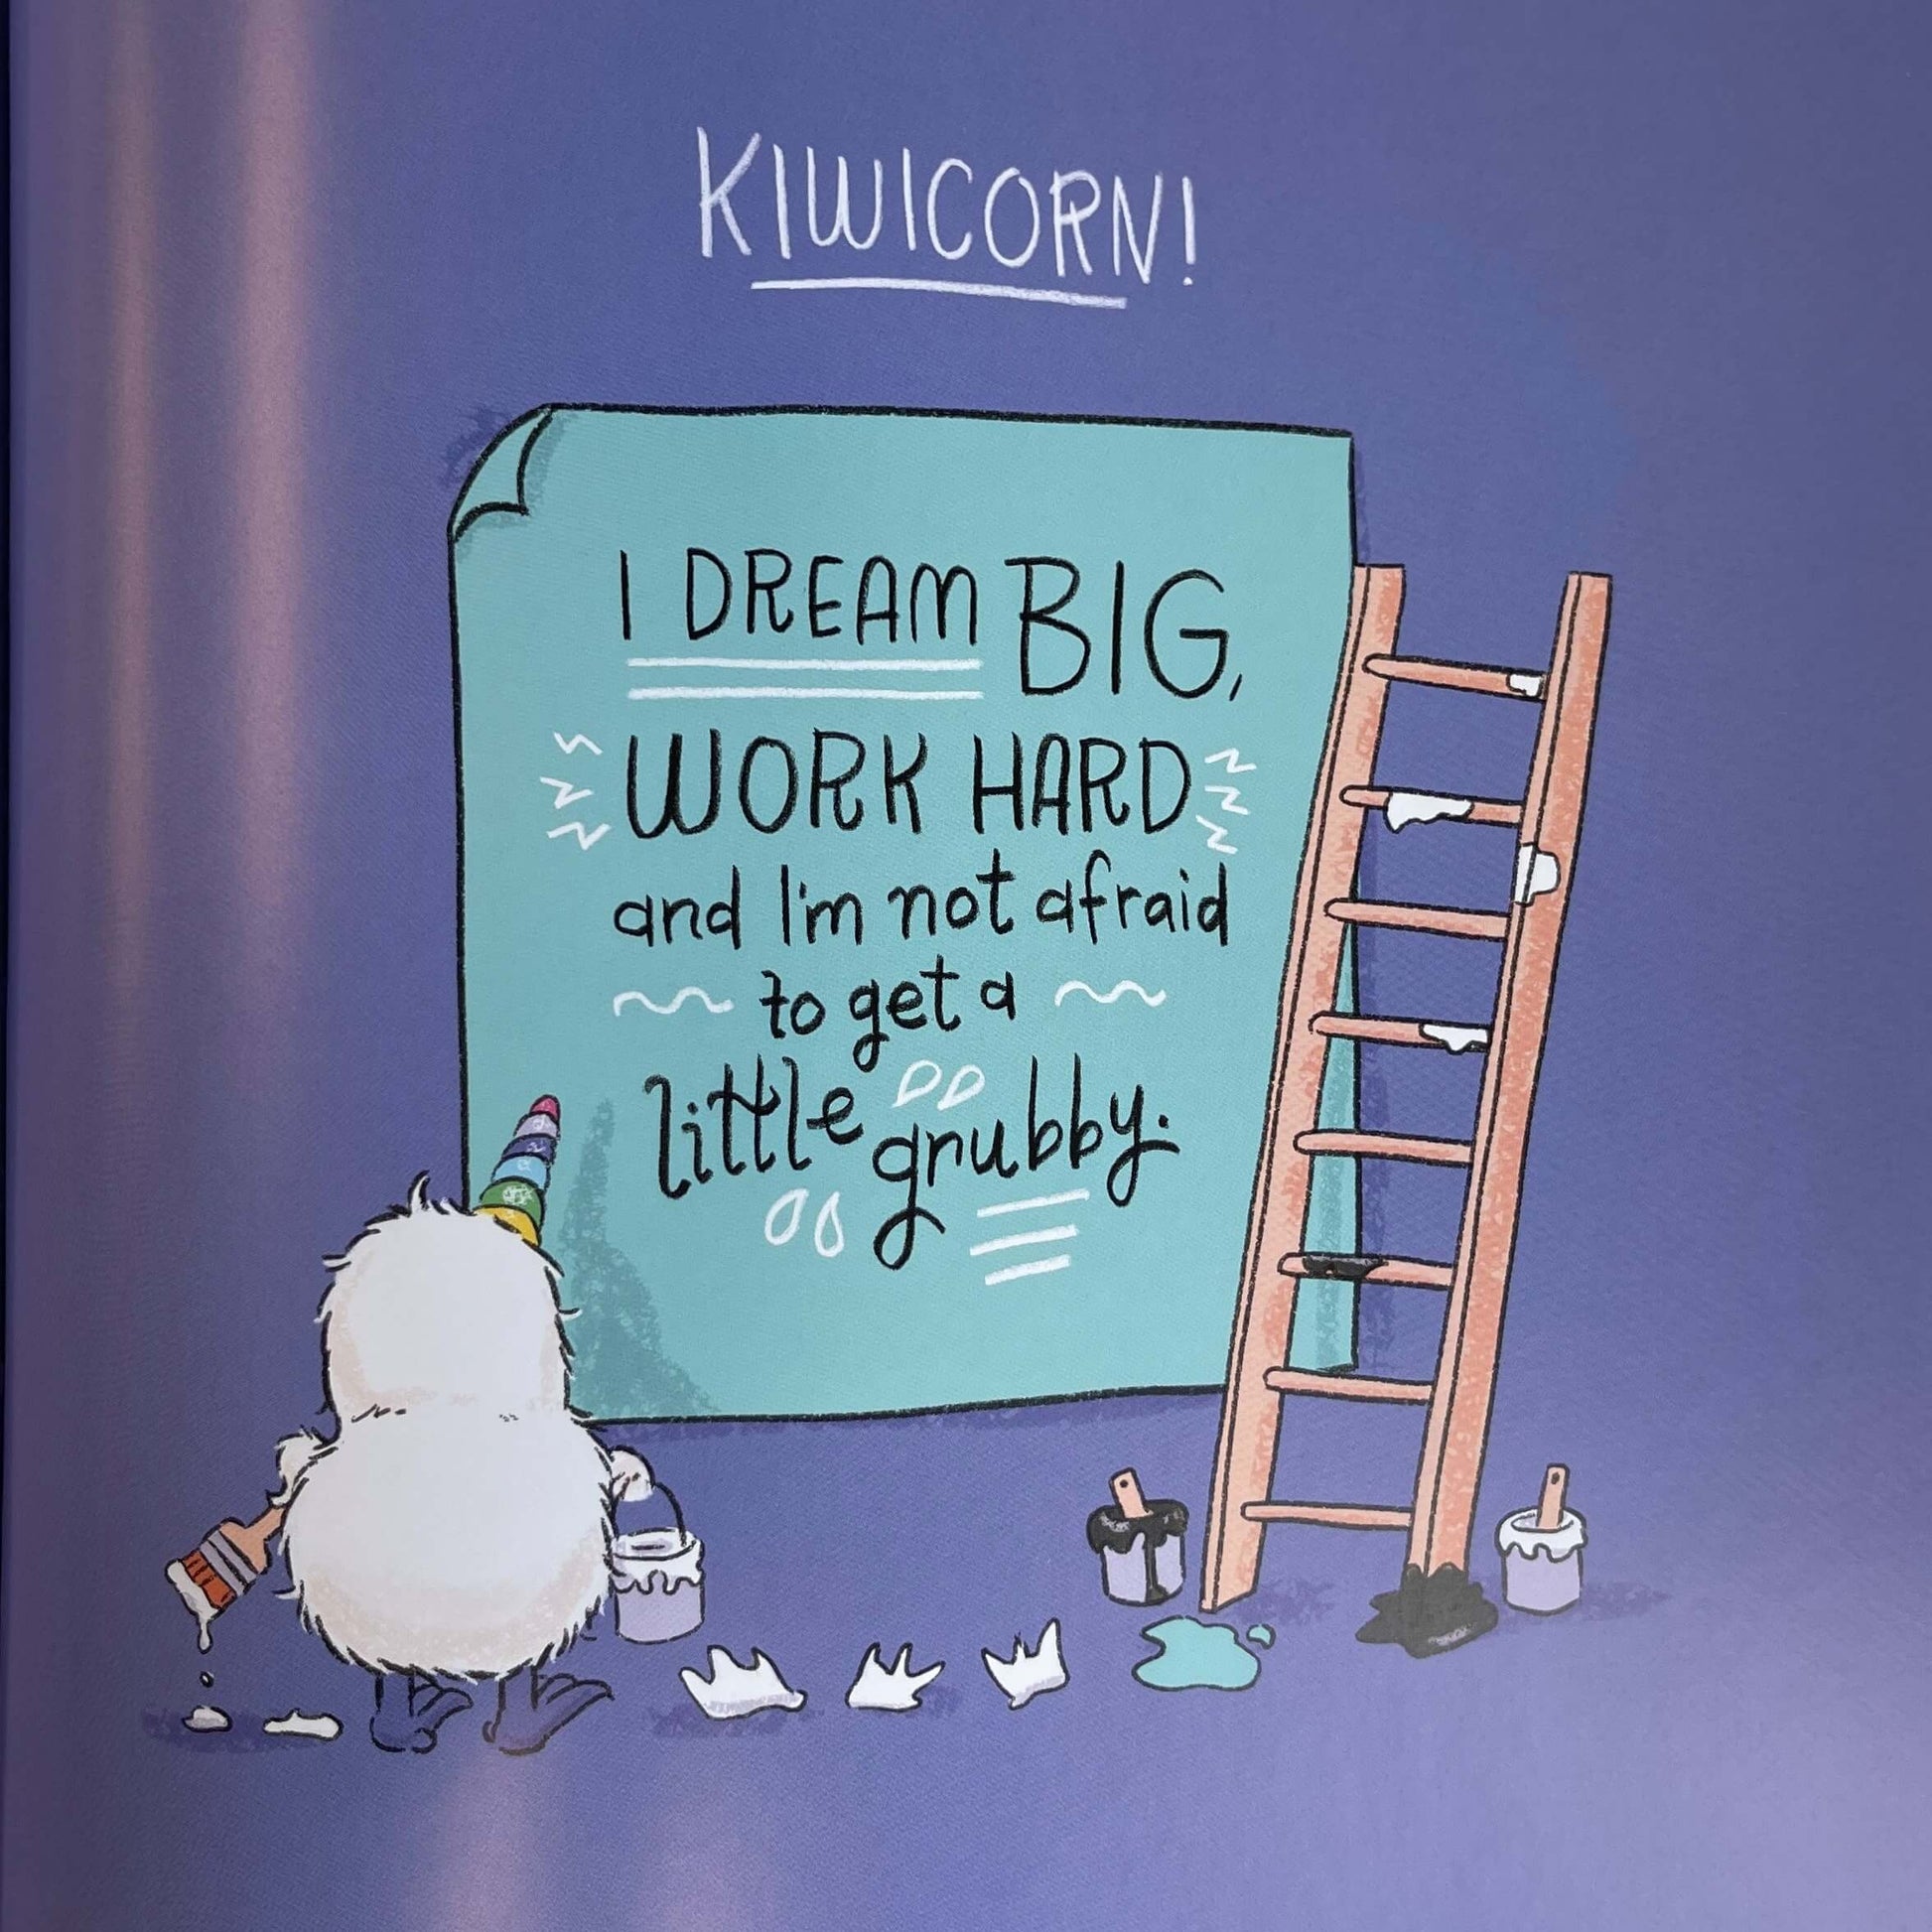 Page from Childrens book Kiwicorn by Kat Merewether.